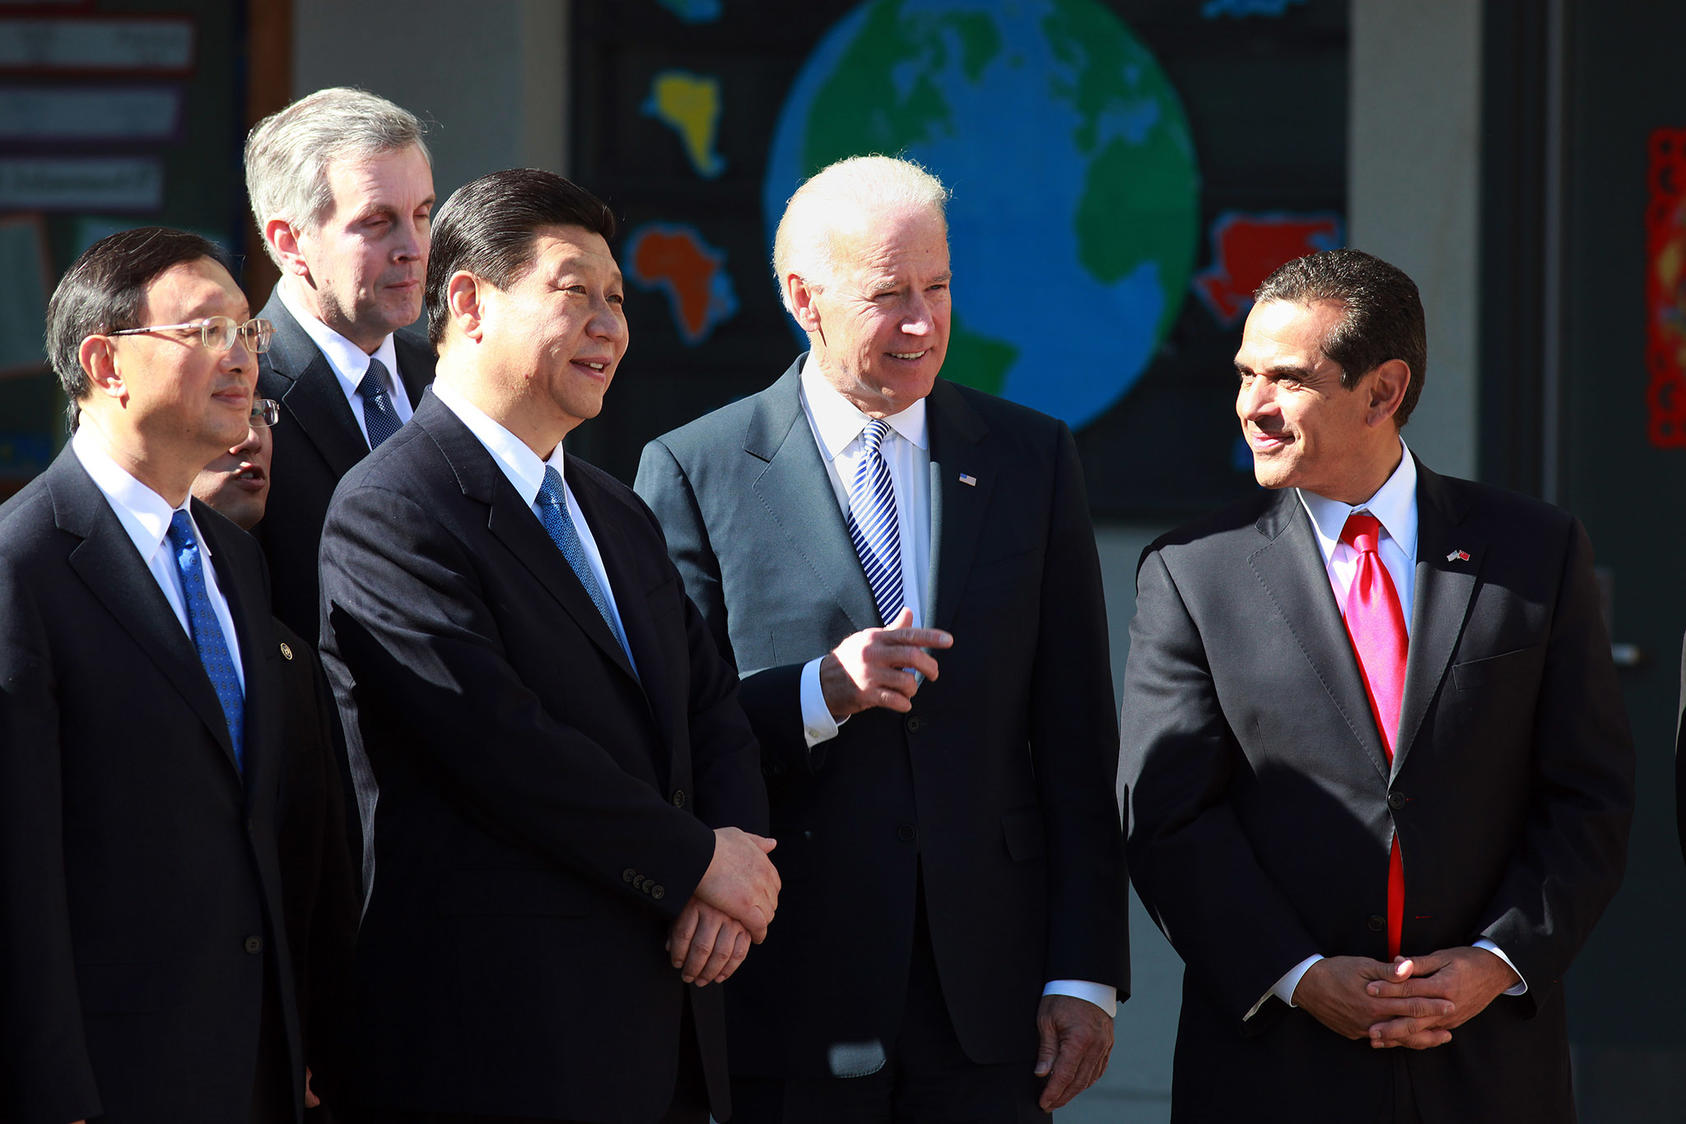 Joe Biden, then the vice president, with Xi Jinping, third from left, now China's leader, in South Gate, Calif., Feb. 17, 2012.